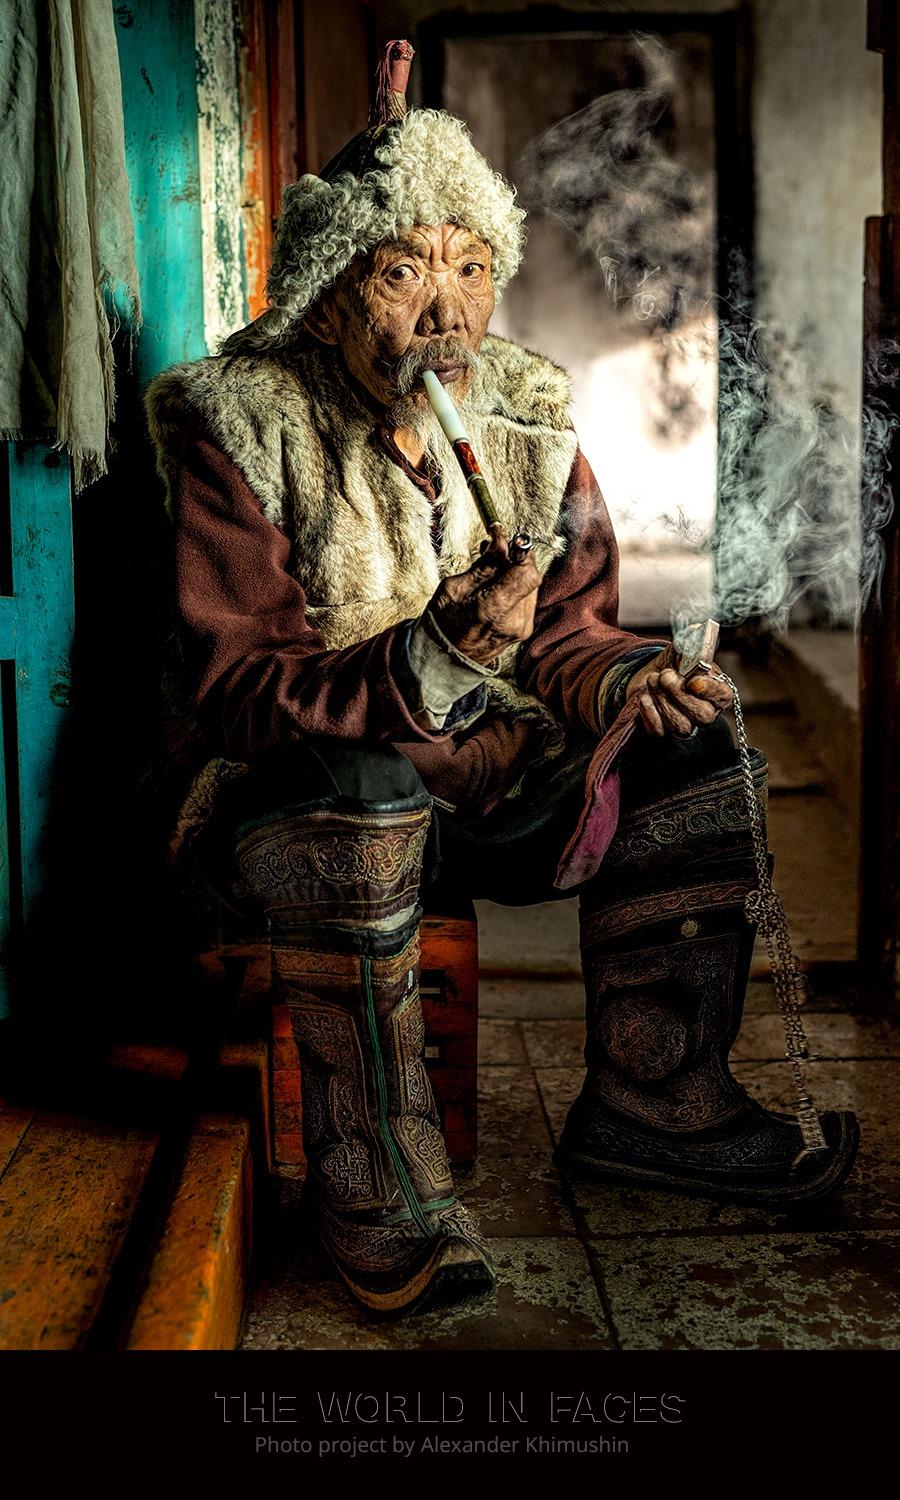 A Uriankhai man from as remote a location as one can imagine: somewhere in Khovd Aimag of Western Mongolia (© <a href="https://www.facebook.com/xperimenter">Alexander Khimushin</a> / The World In Faces)